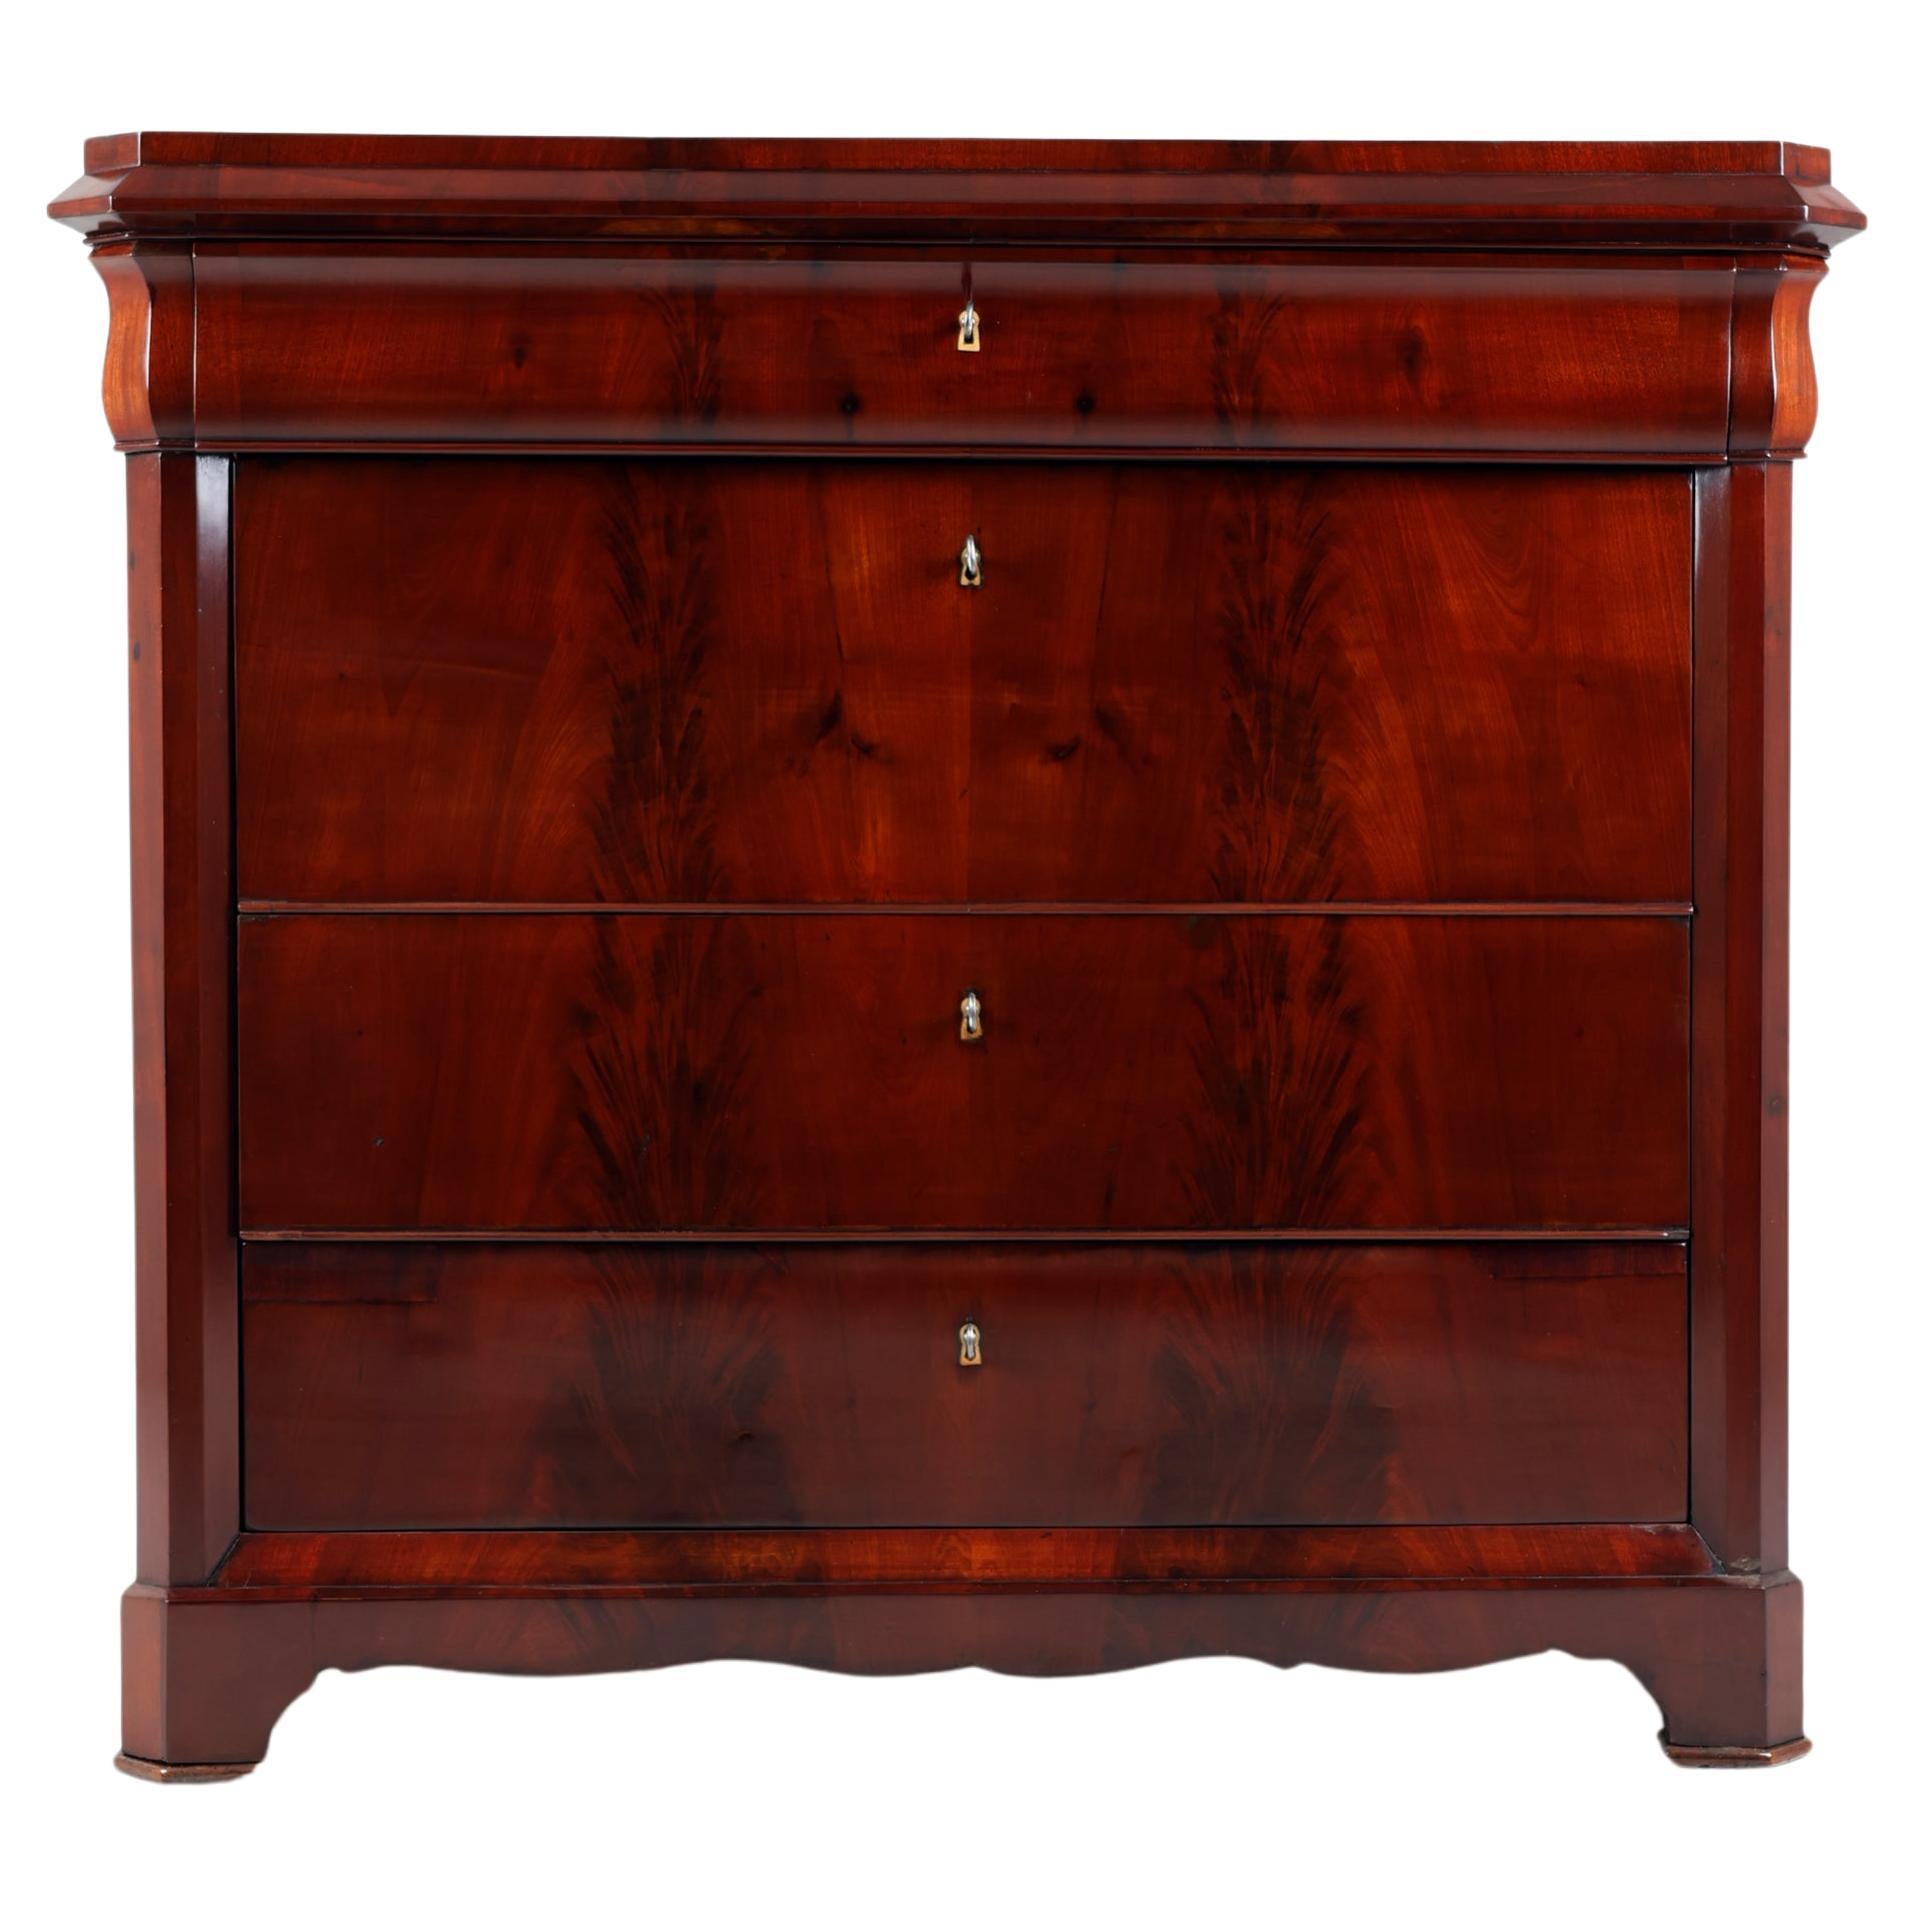 XIX Century Biedermeier Chest of Drawers,
Germany, 1830-1835
Mahogany

Biedermeier Chest of Drawers with spectacular mahogany veneer which is laid absolutely symmetrically and runs across the entire front of the furniture.
Four drawers with discreet